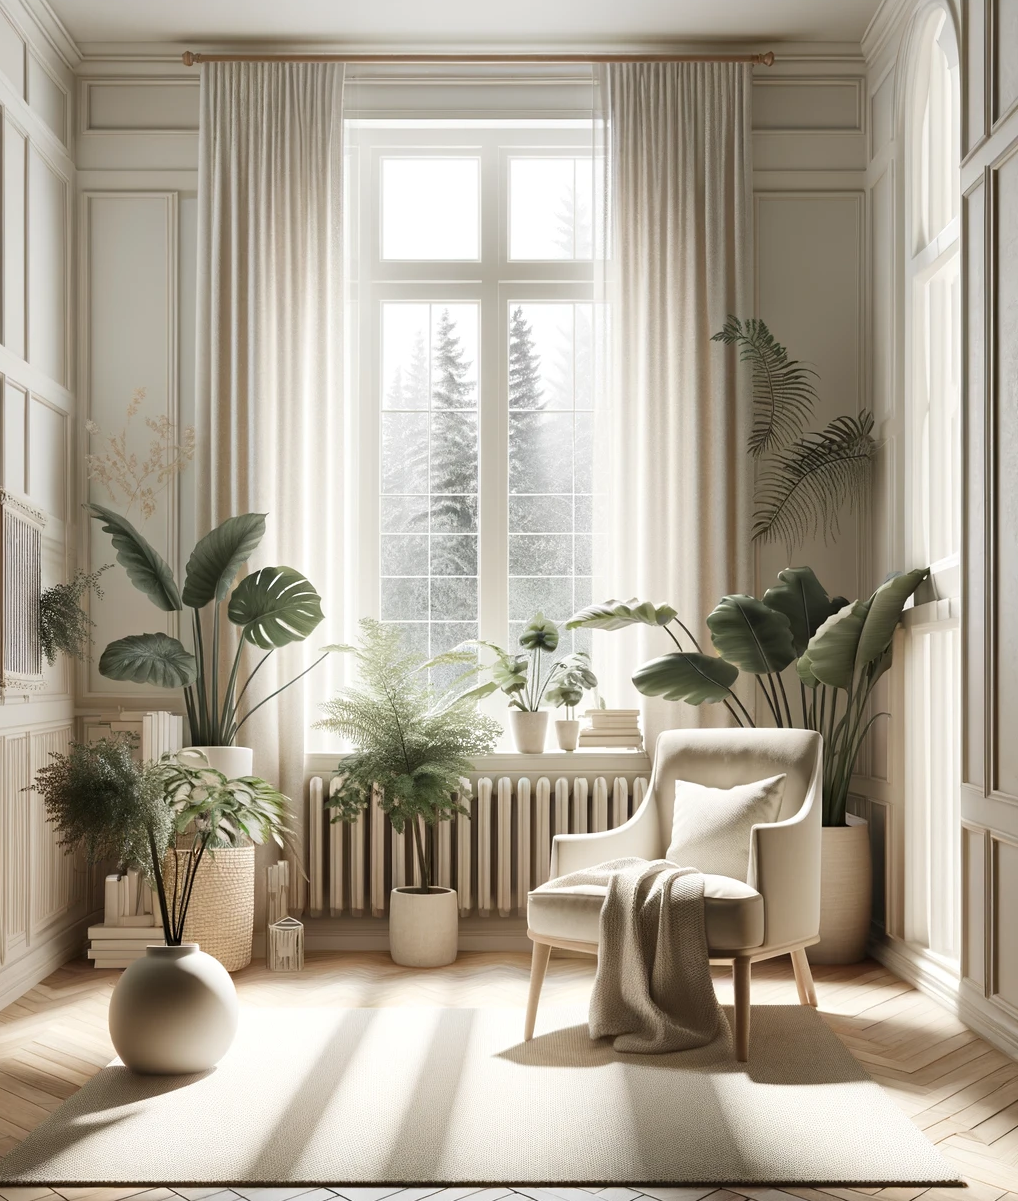 Image of off white natural themed living space with leafy houseplants all around